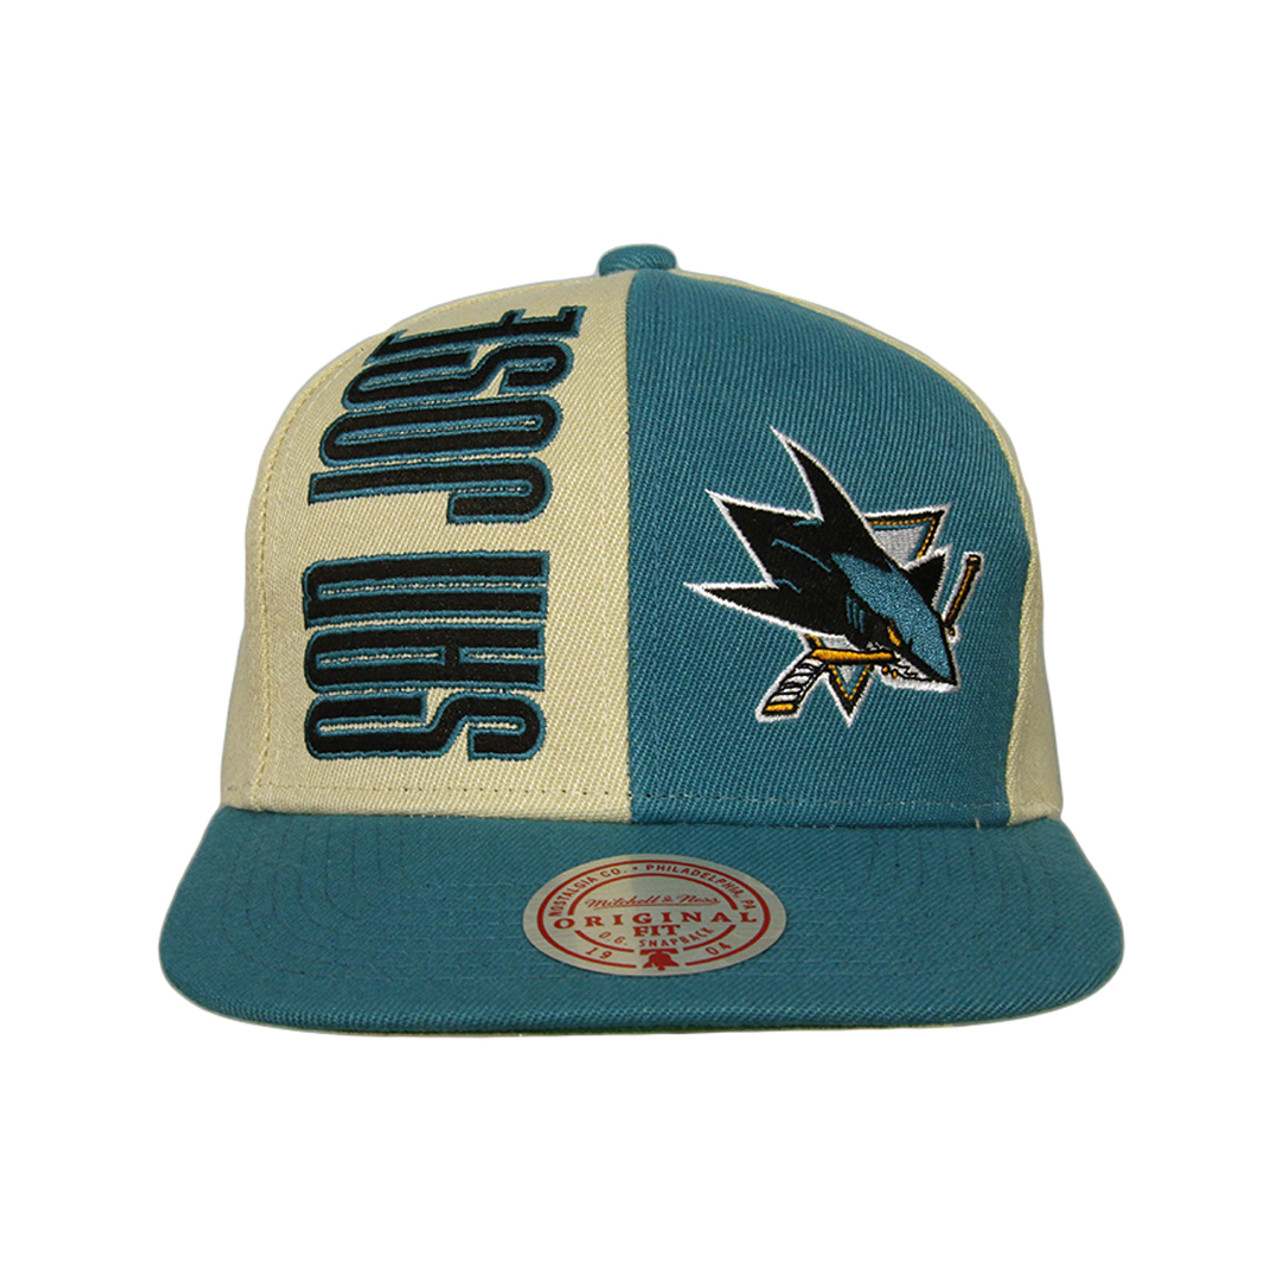 Men's Mitchell & Ness Teal San Jose Sharks Vintage Fitted Hat